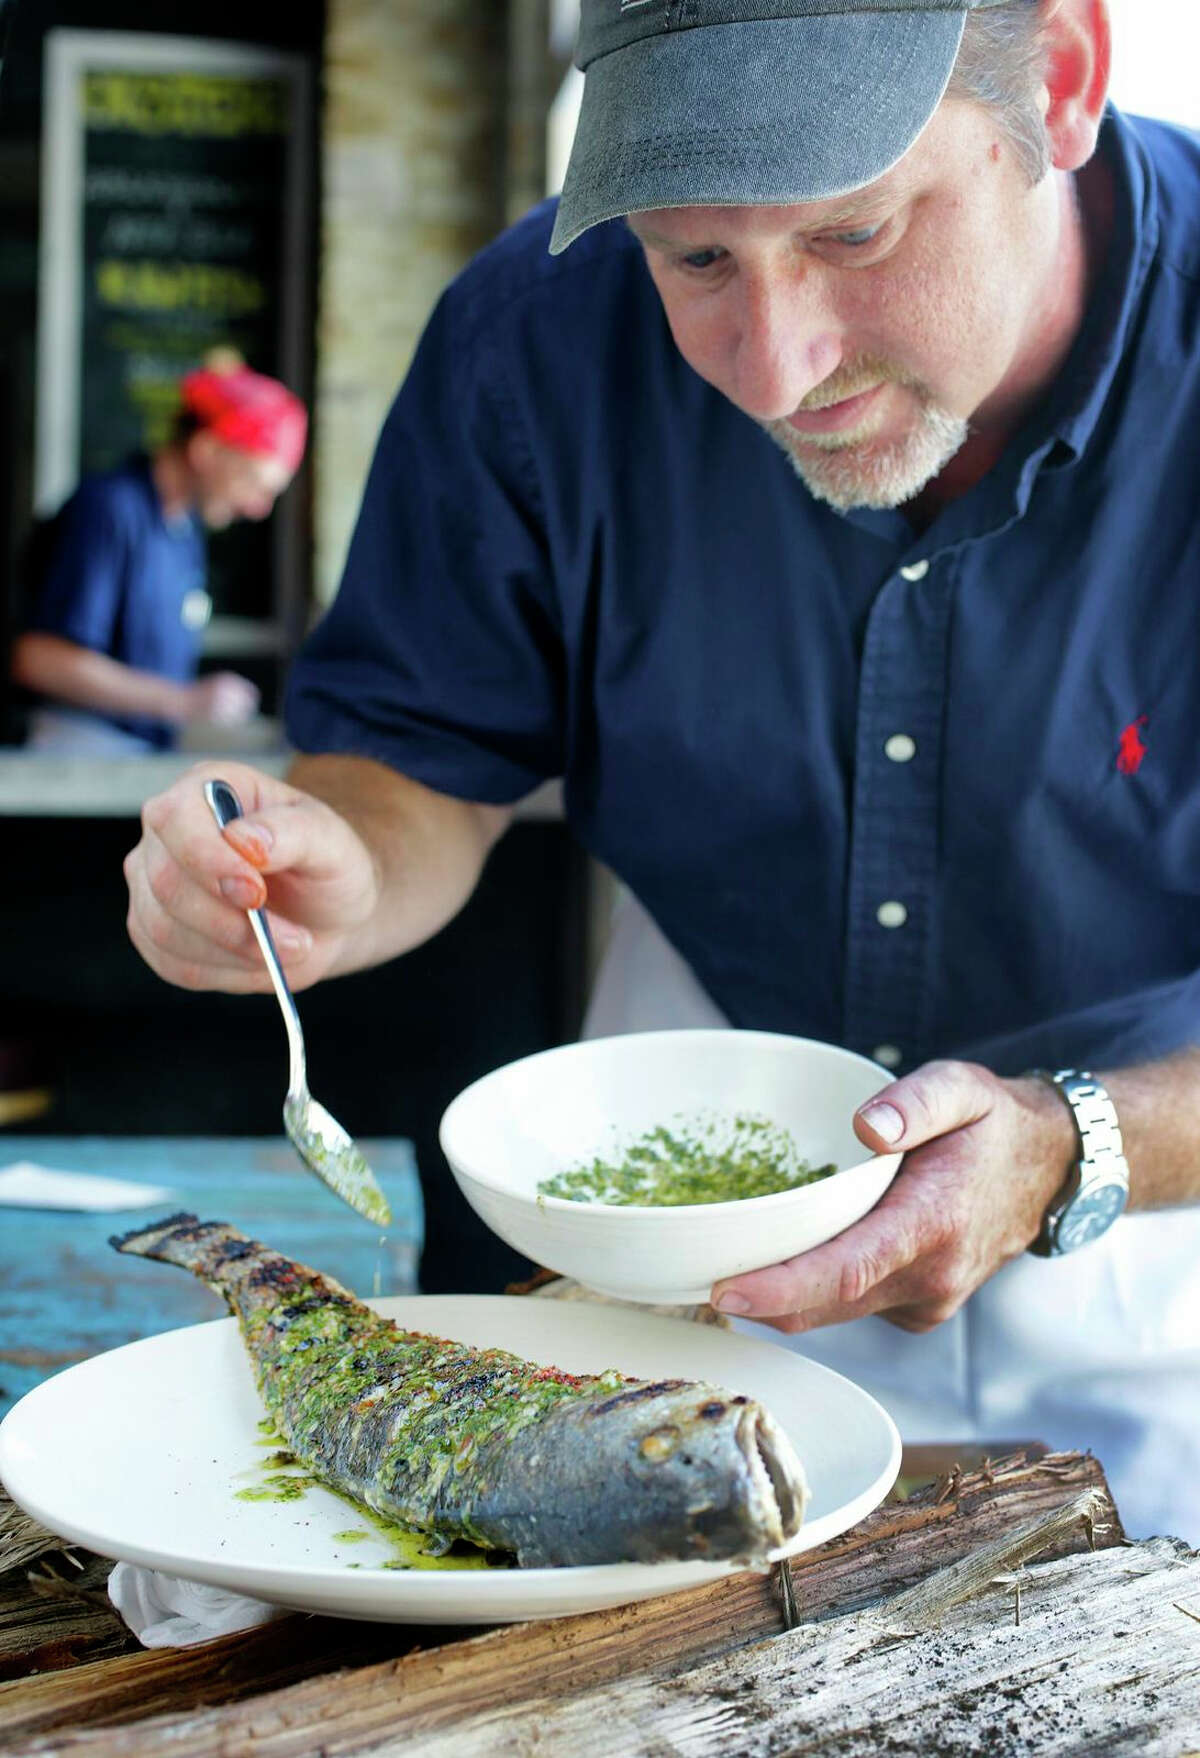 Donald Link, chef and co-owner of Peche Seafood Grill ladles a green sauce (fresh mint, parsley, lemon, garlic and olive oil, plus dried flakes of the sweet, slightly hot Crilloa sella chiles) over whole grilled fish.